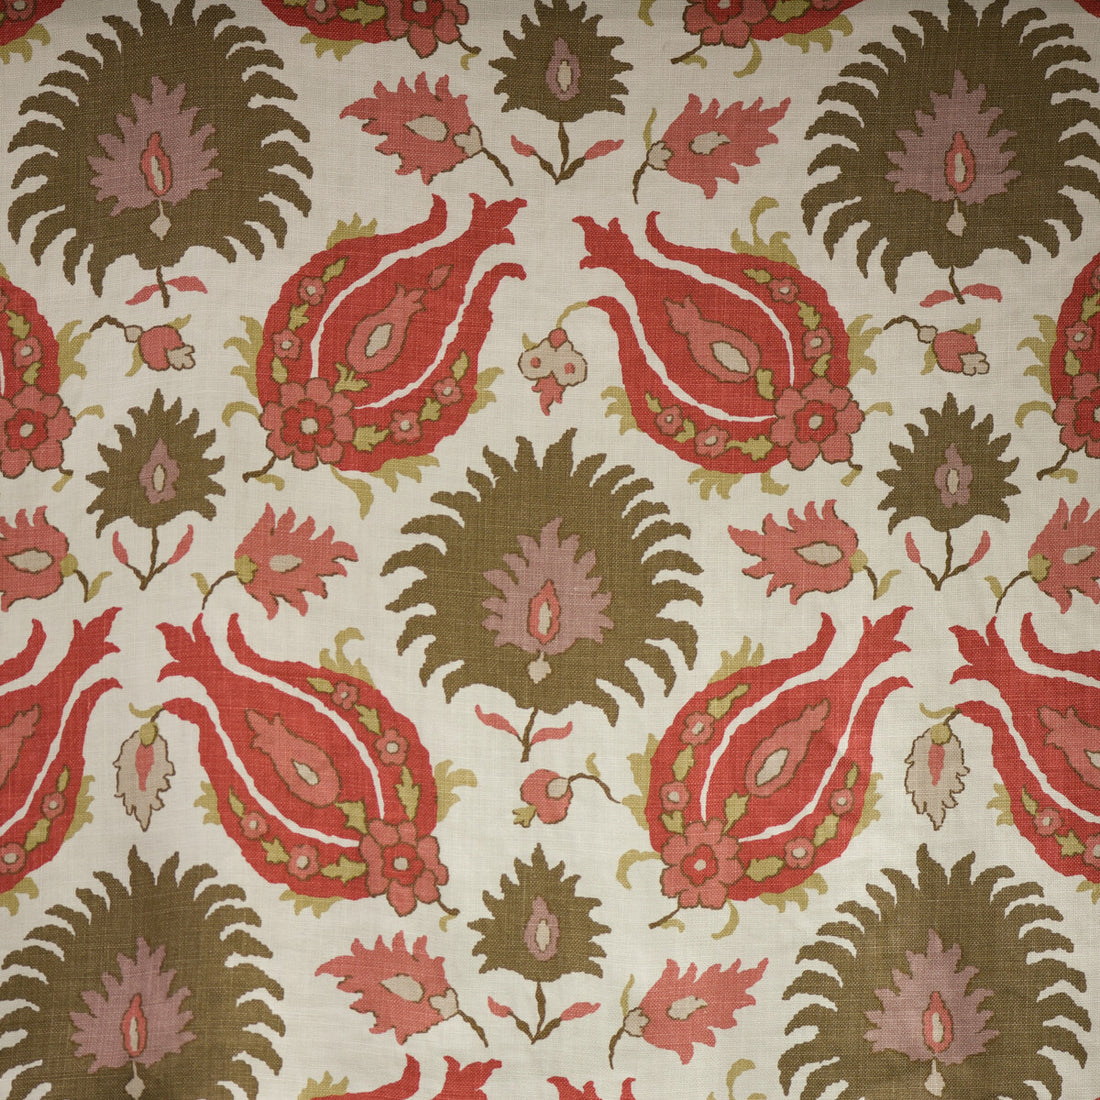 Kashmiri Linen Print fabric in blush/toast color - pattern BR-700020.1736.0 - by Brunschwig &amp; Fils in the Grand Bazaar collection